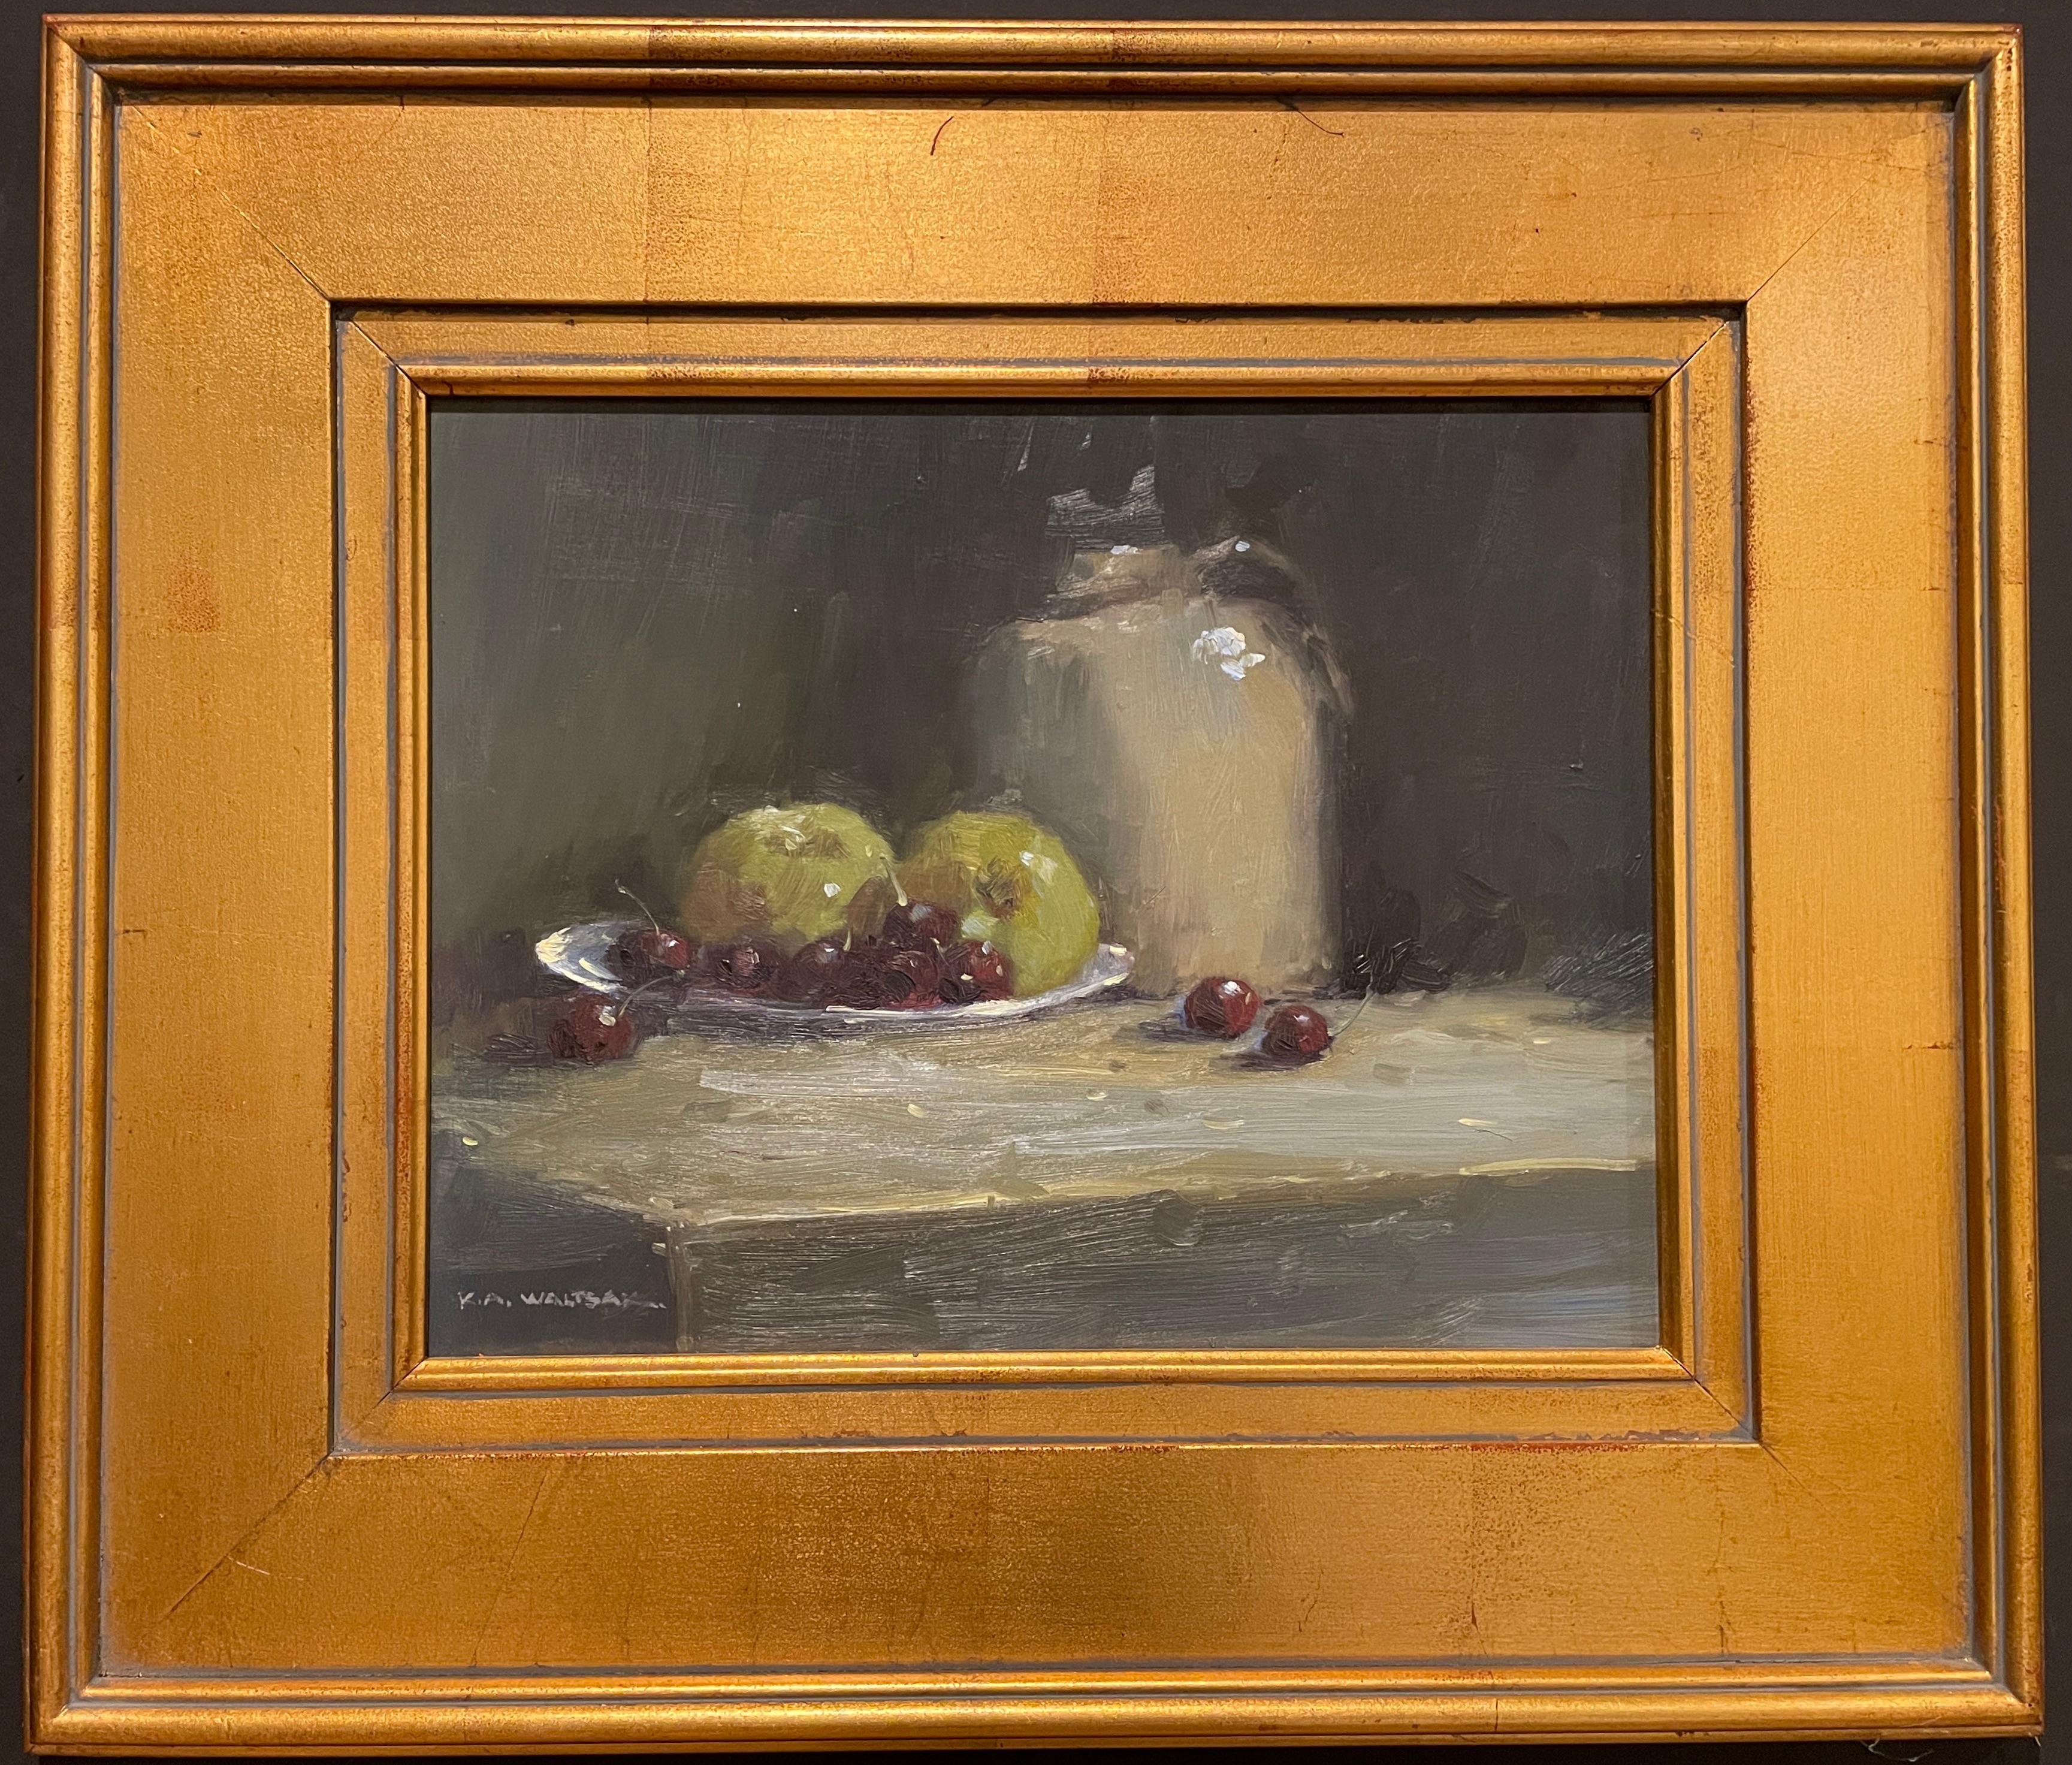 Robert Waltsak (American, b. 1944). Impressionist still, fruit.
A popular New Jersey artist, Waltsak studied at the Newark School of Fine and Industrial Art as well as at the Ridgewood Art Institute, both leading art institutions of the state of New